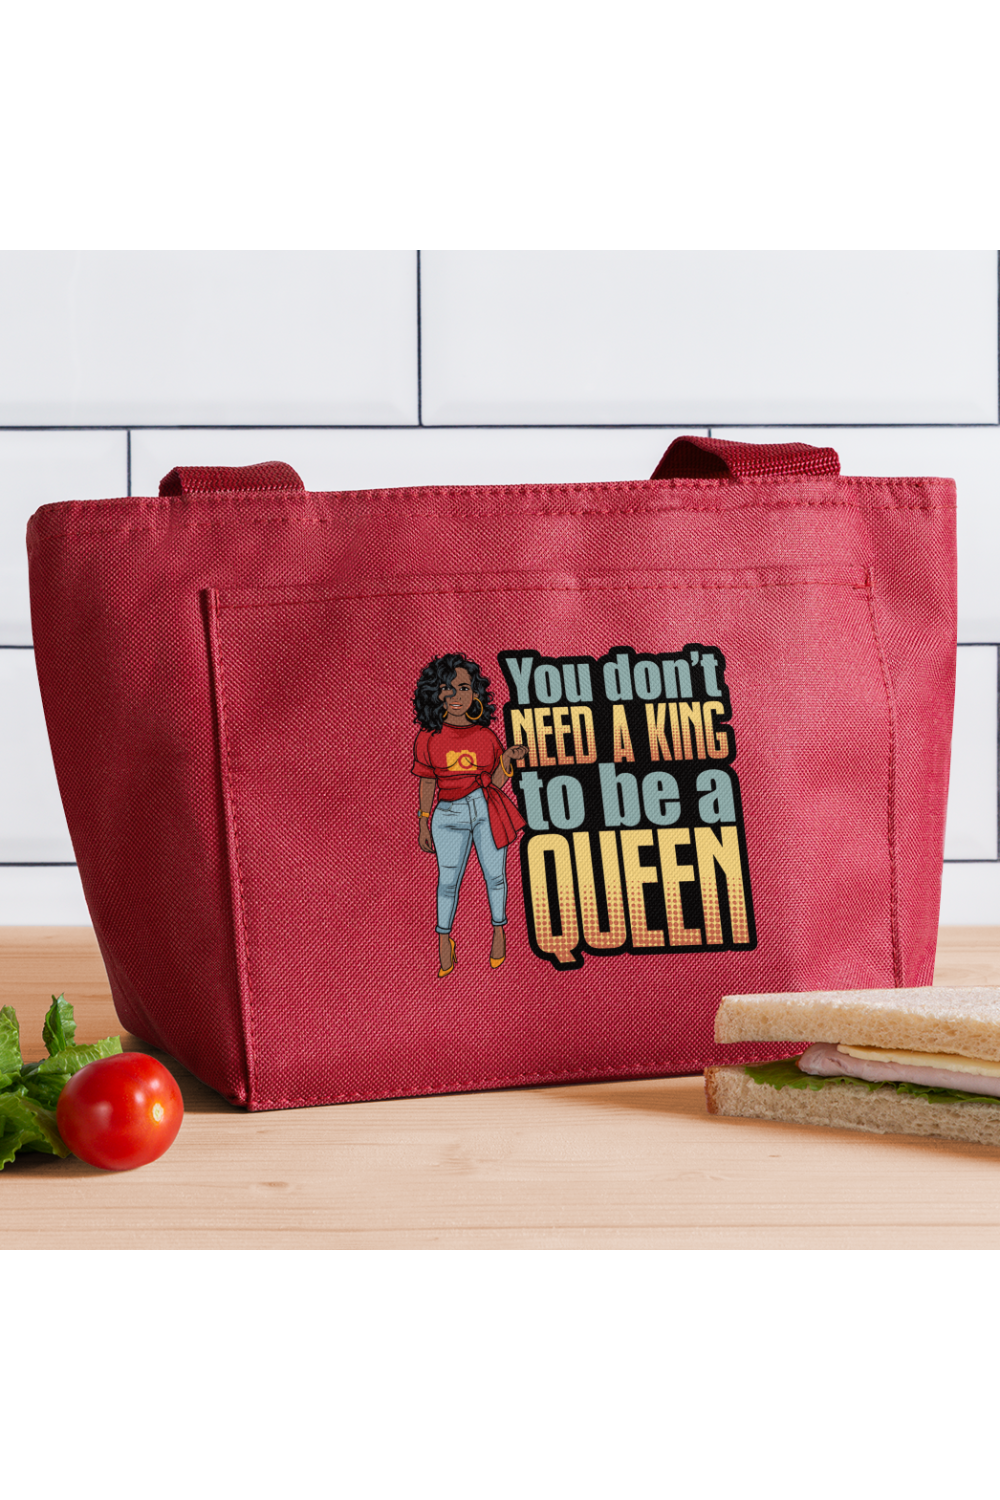 African American Women You Don't Need a King To Be a Queen Lunch Bag - red - NicholesGifts.online